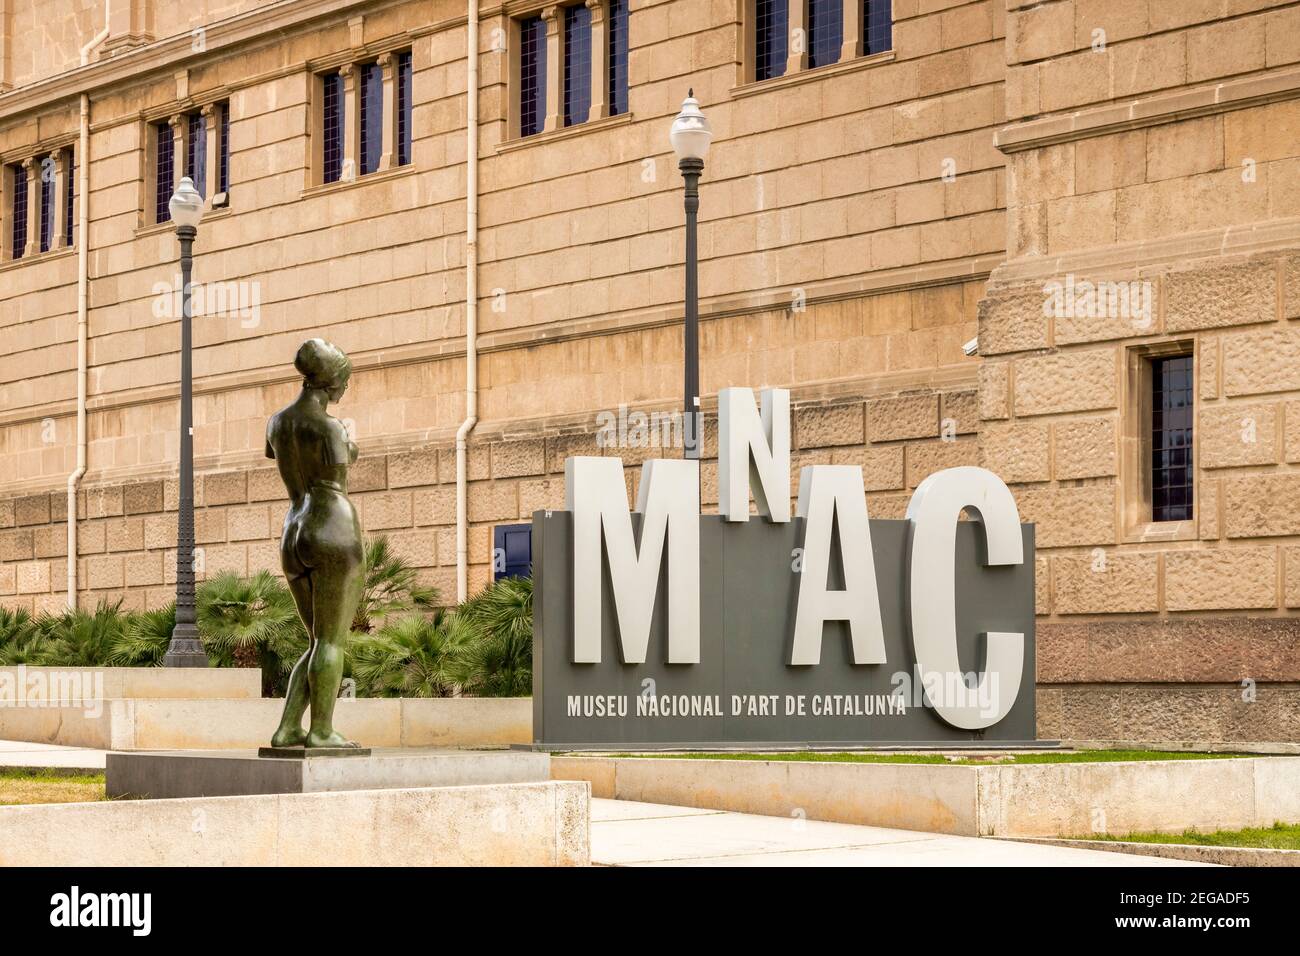 4 March 2020: Barcelona, Spain - Sign and sculpture at the entrance to the National Art Museum of Catalonia on Montjuic hill in Barcelona. Stock Photo